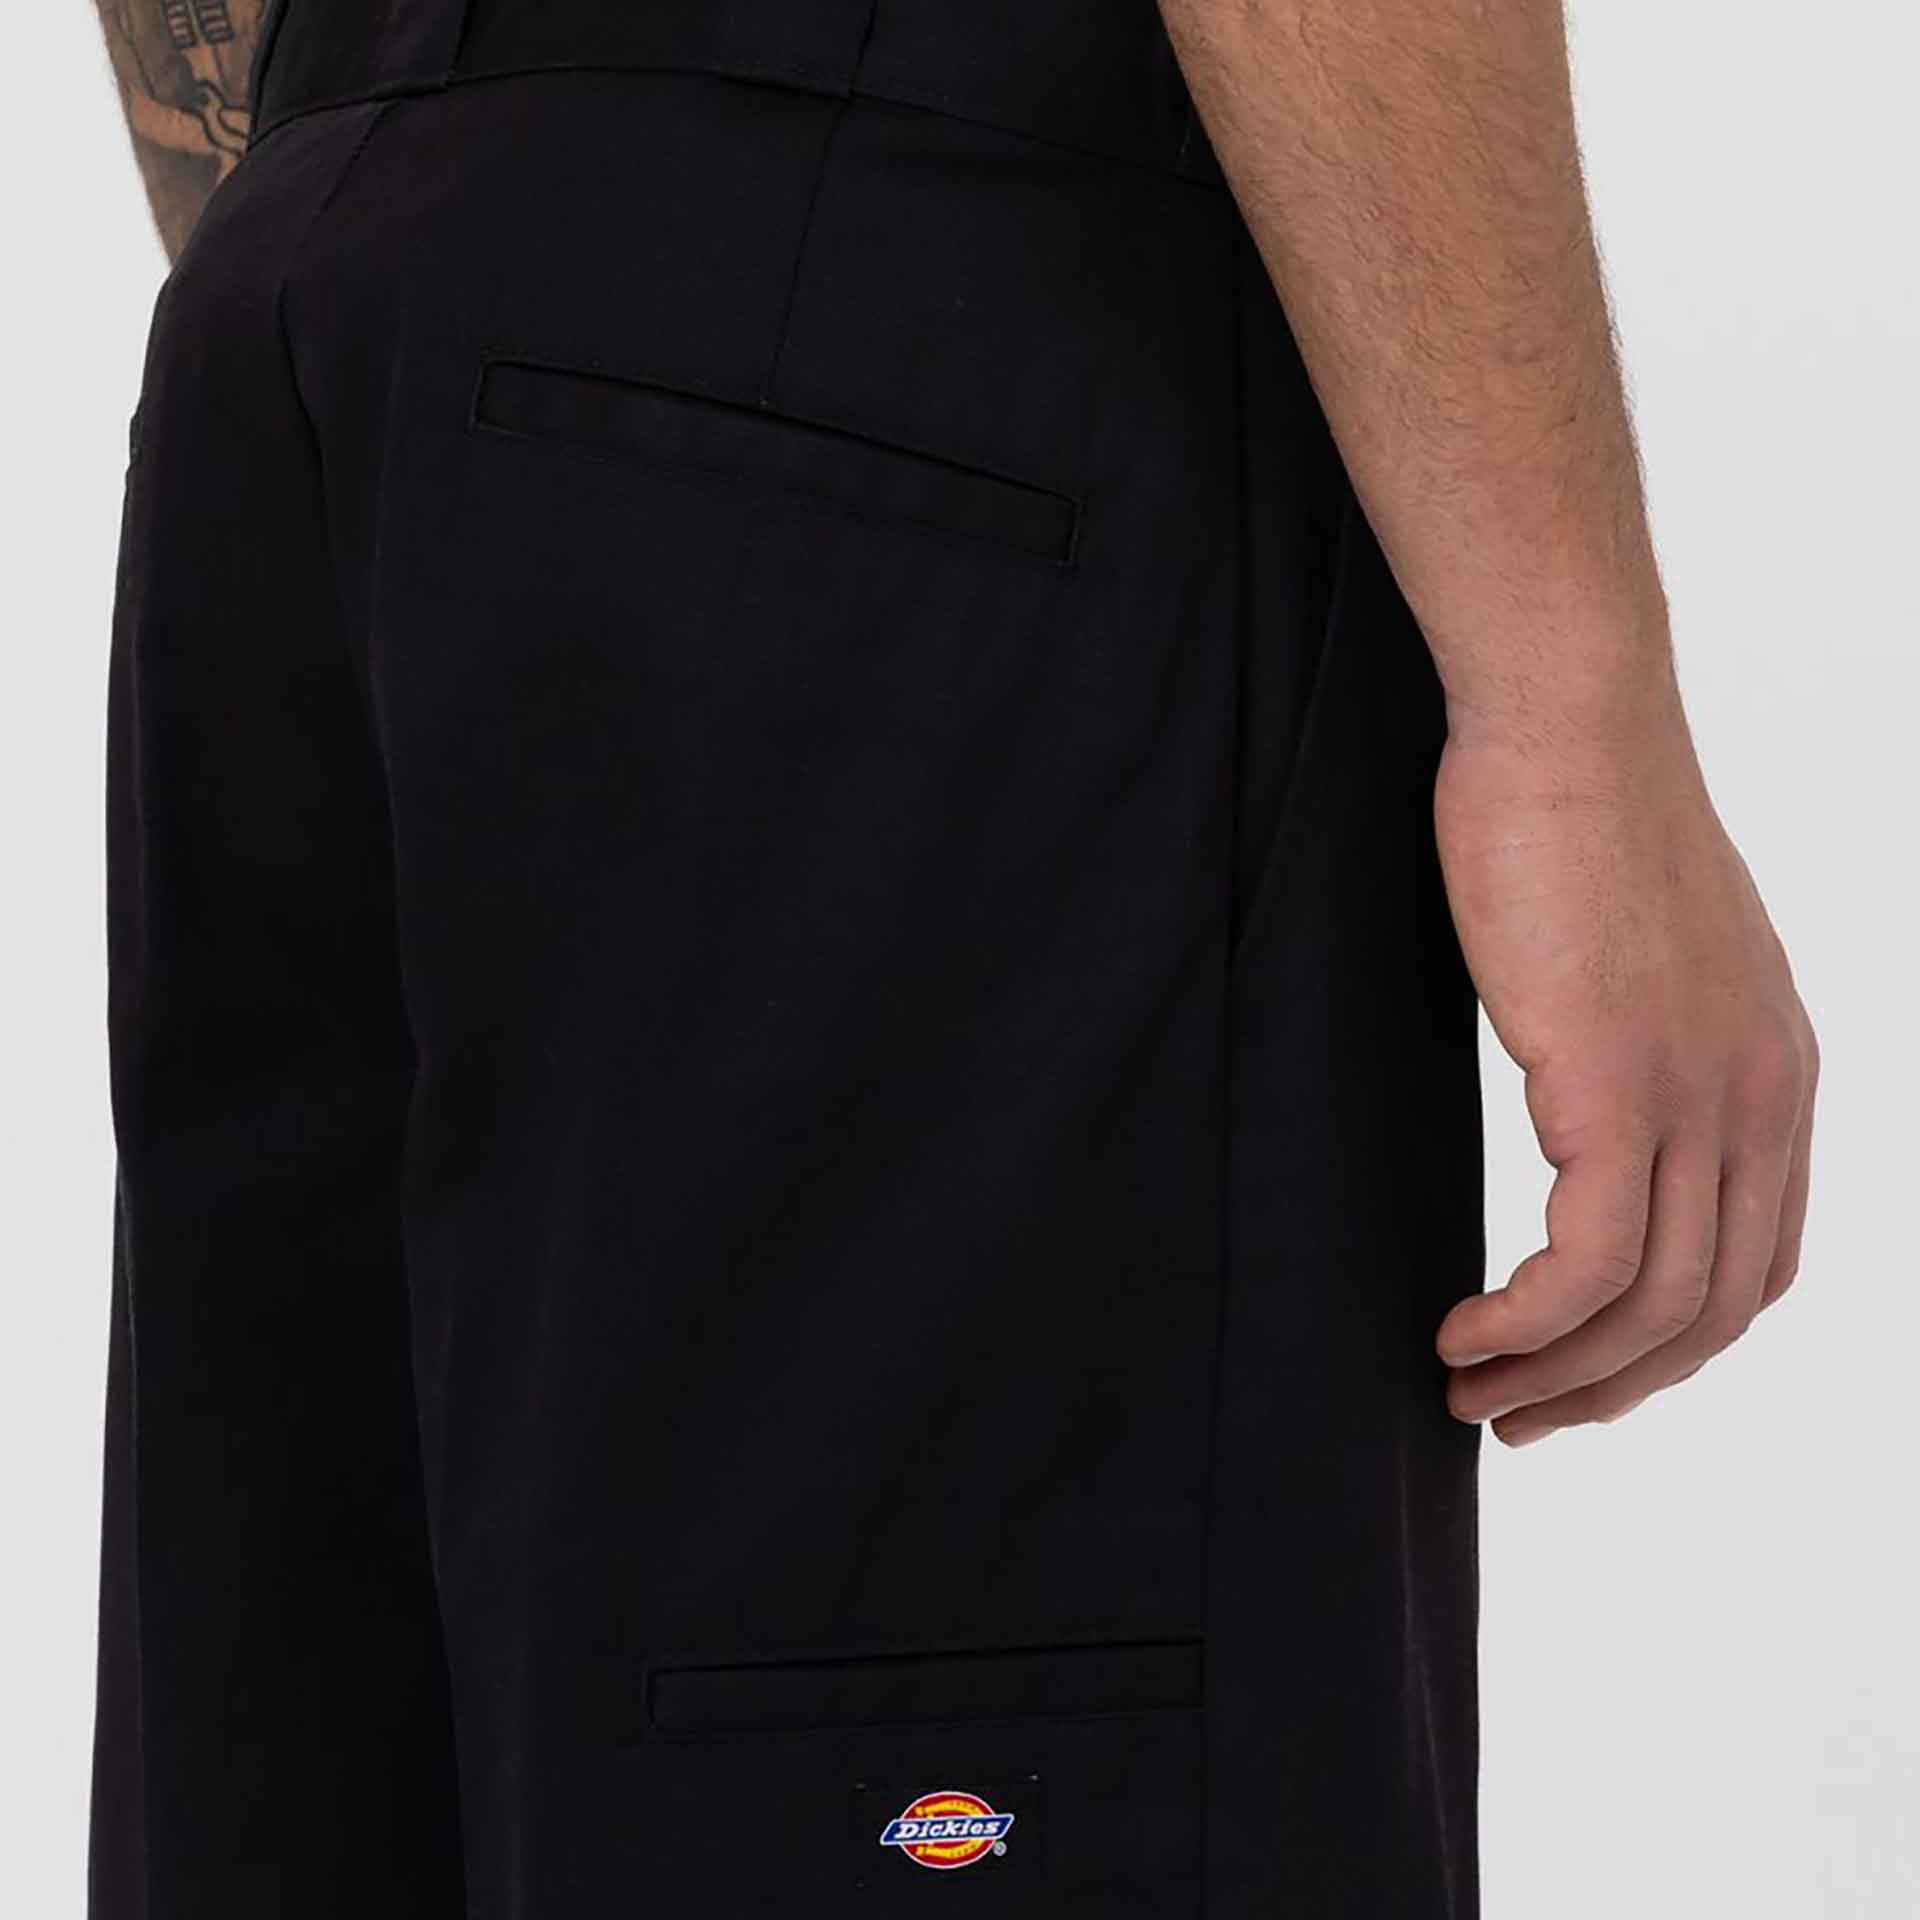 Dickies Double Knee Recycled Chino Pant Black